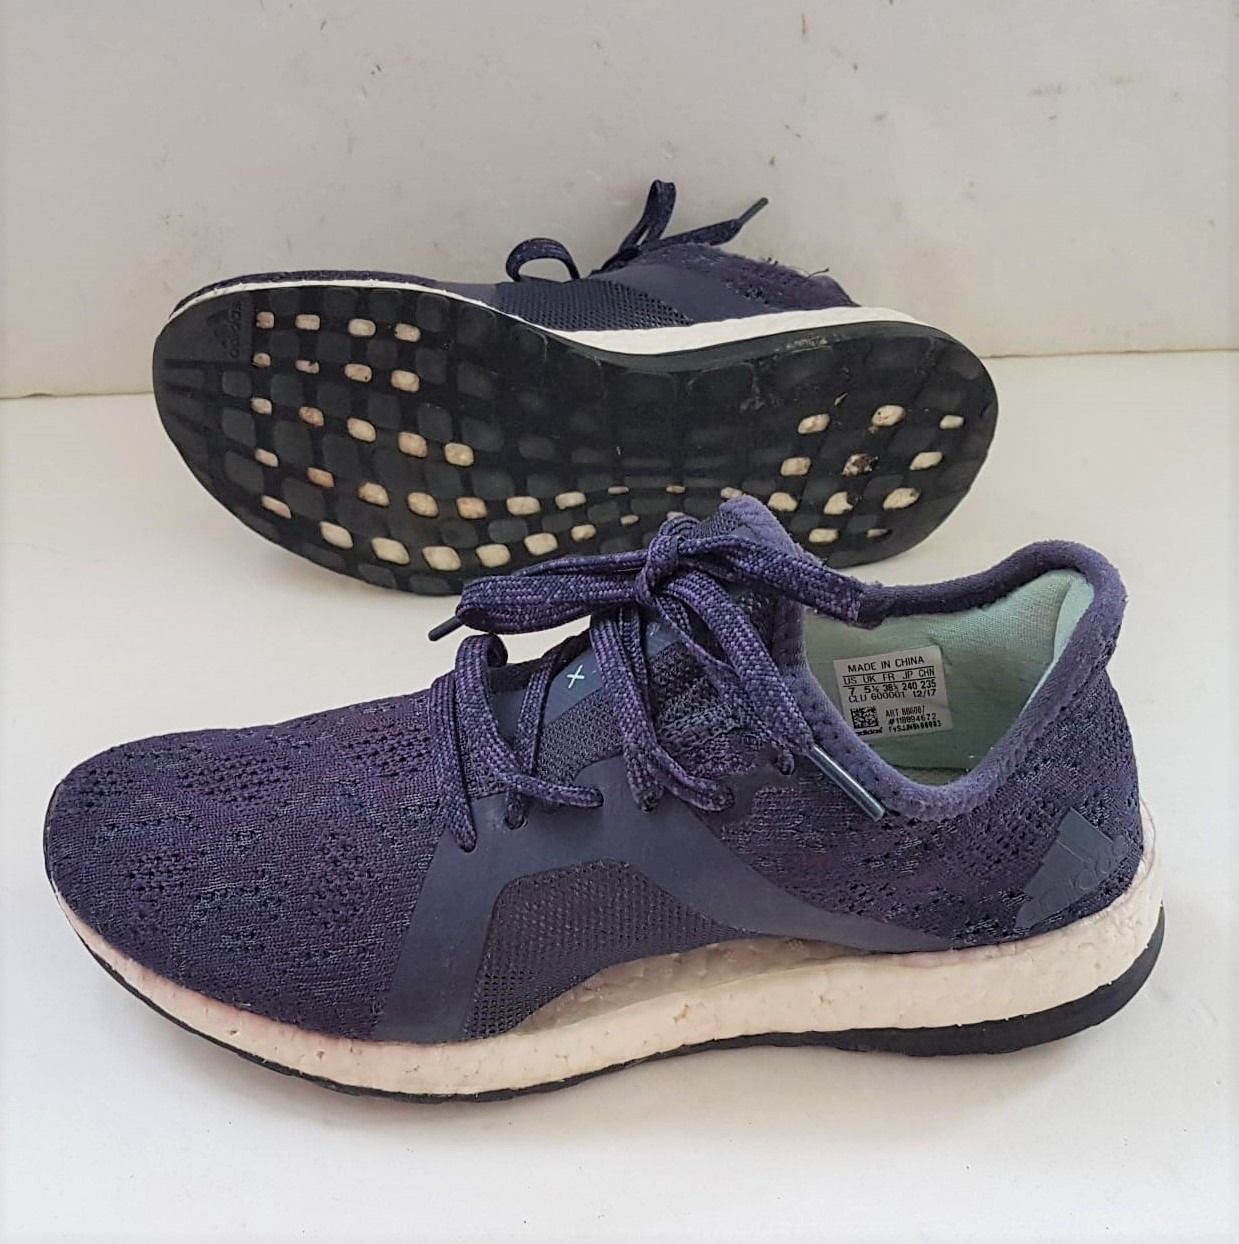 Adidas Pure Boost X Element Shoes, US 7, UK 5.5, Euro 38 2/3, Designer  Sneakers,